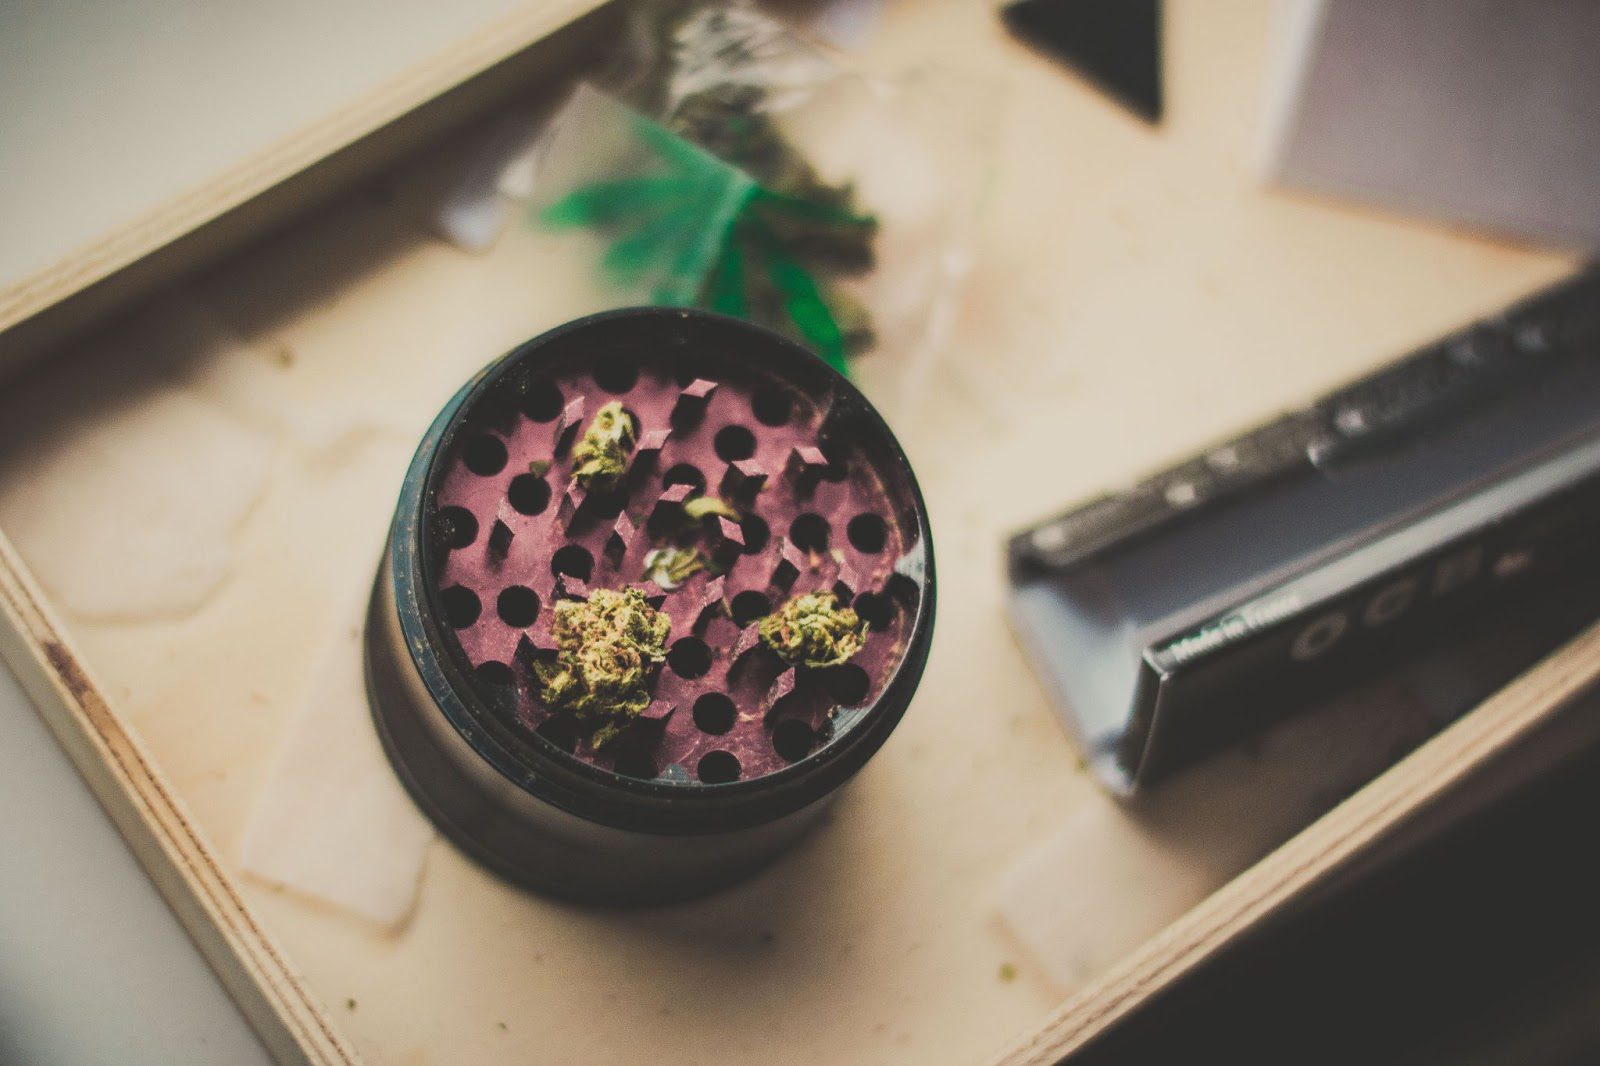 How To Grind Weed